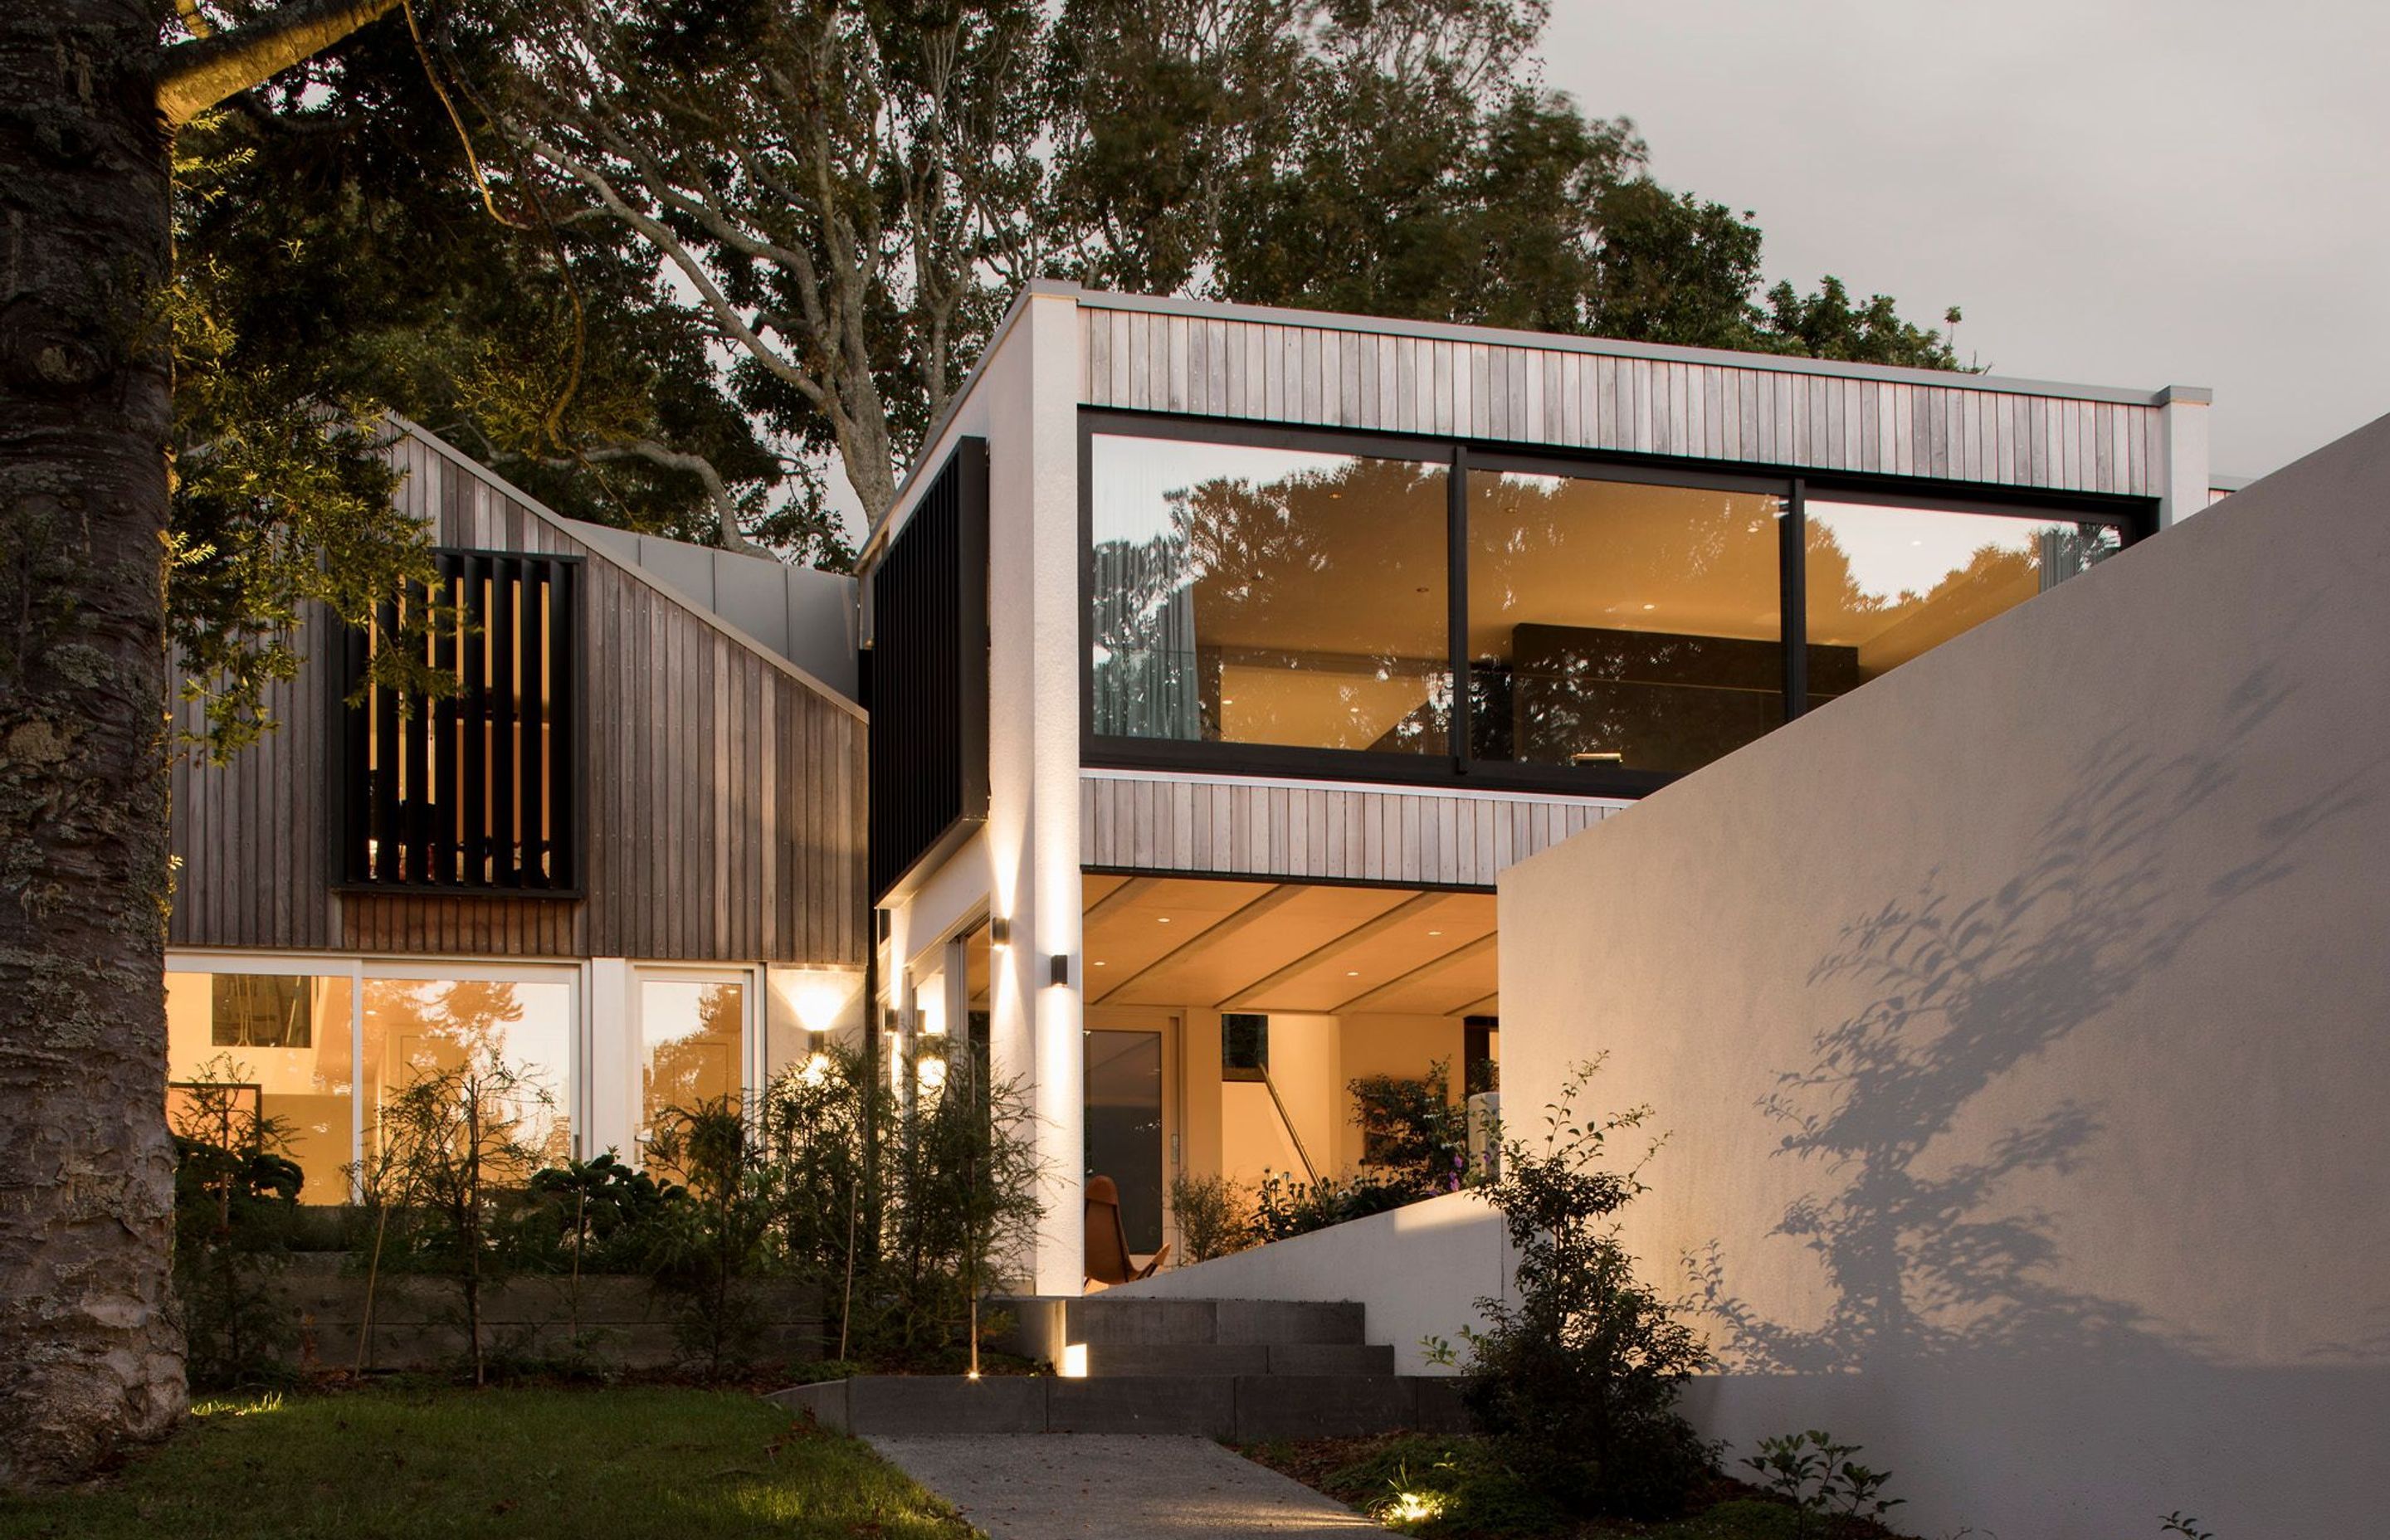 This 159 square metre, the two-level build was constructed with concrete formwork and flooring, with vertical cedar weatherboard detailing.